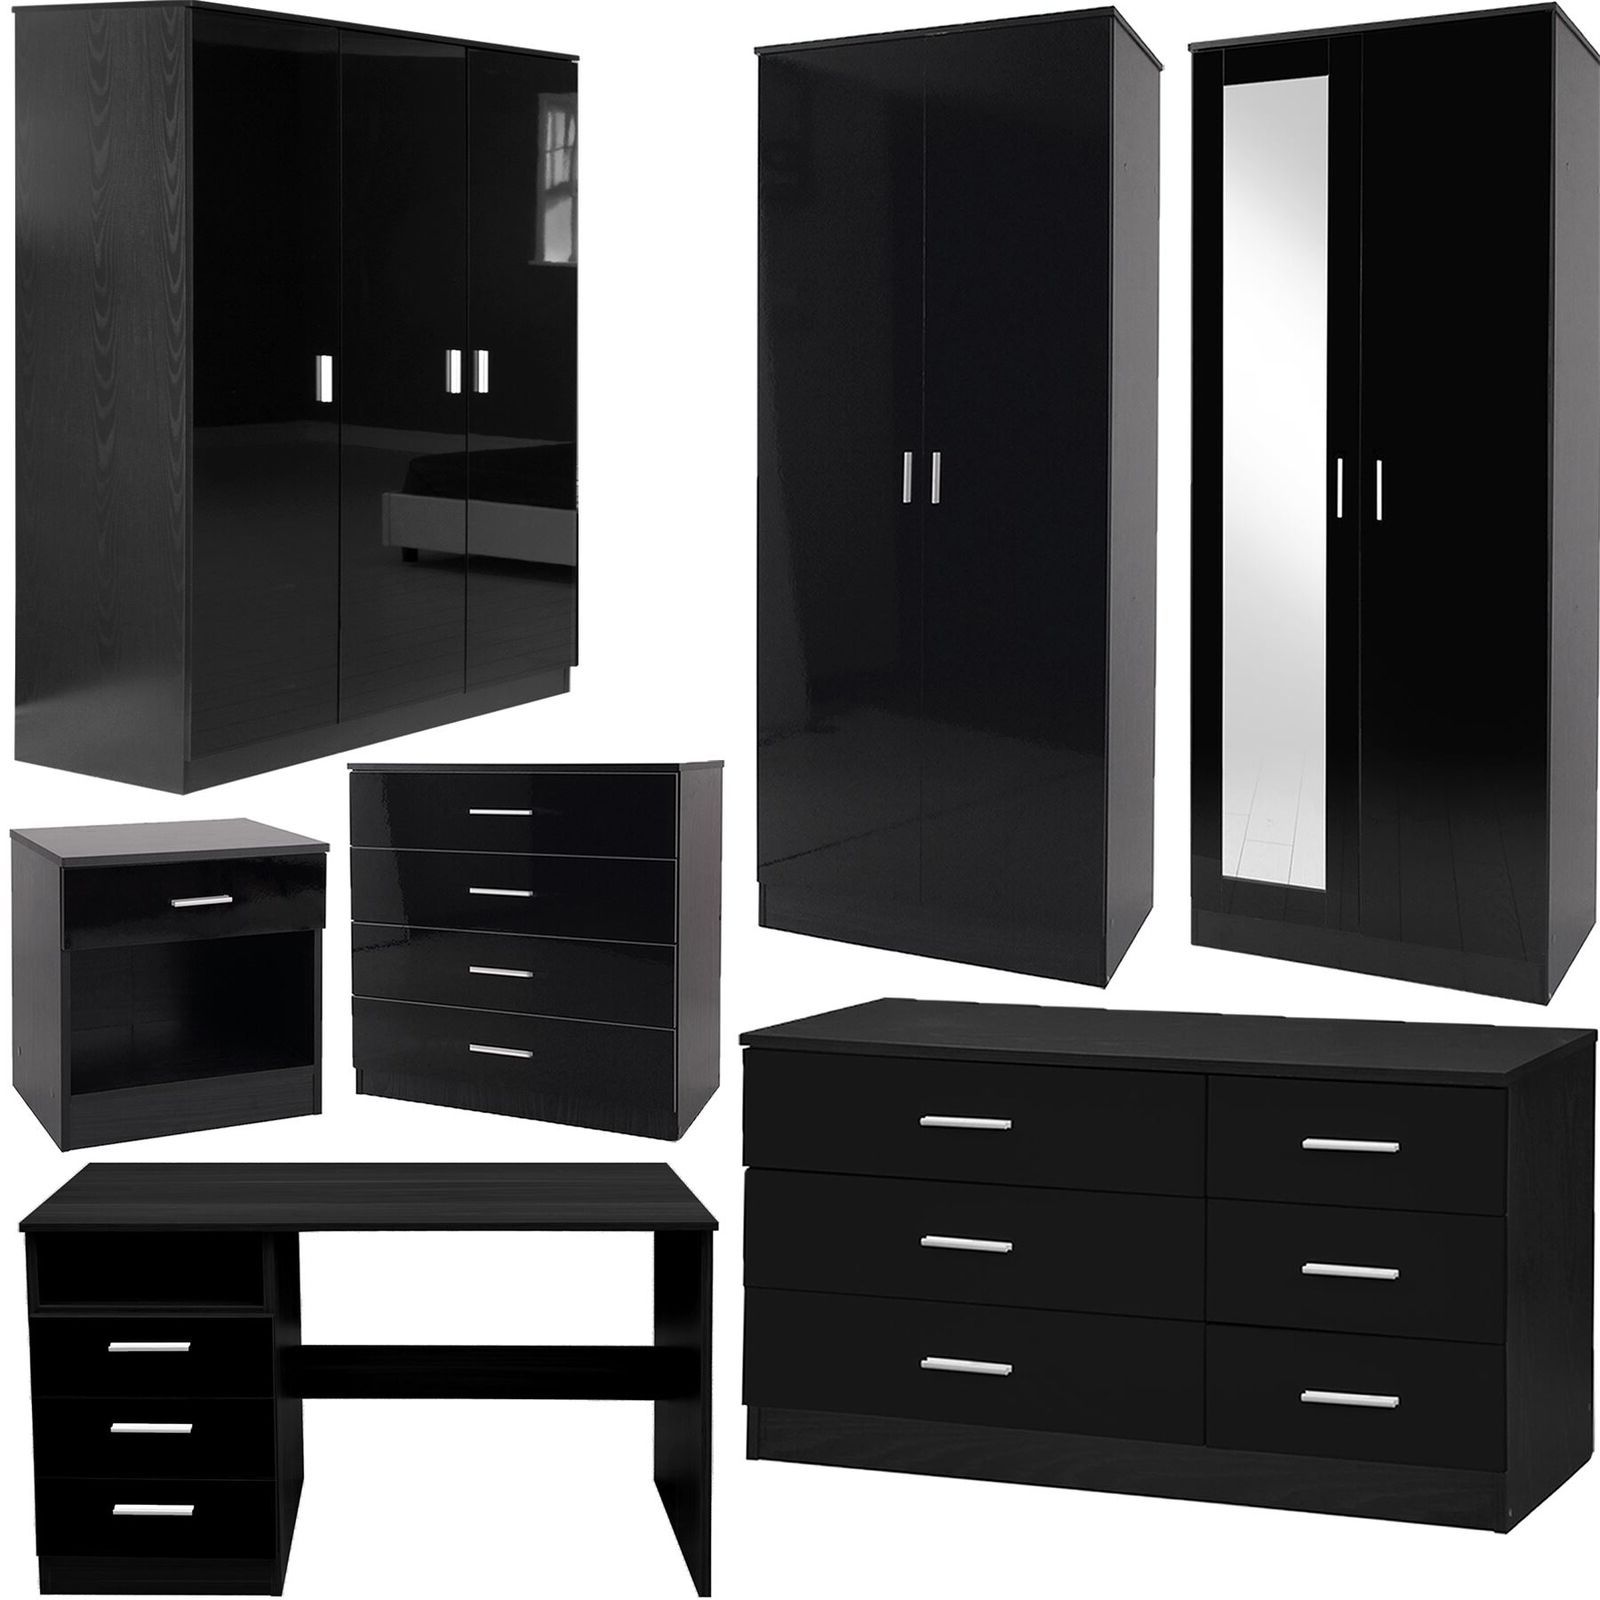 Bedroom Furniture 3 Piece Set Black Gloss Wardrobe Drawer Bedside Chest  Table | Ebay Within Cheap Black Gloss Wardrobes (View 13 of 20)